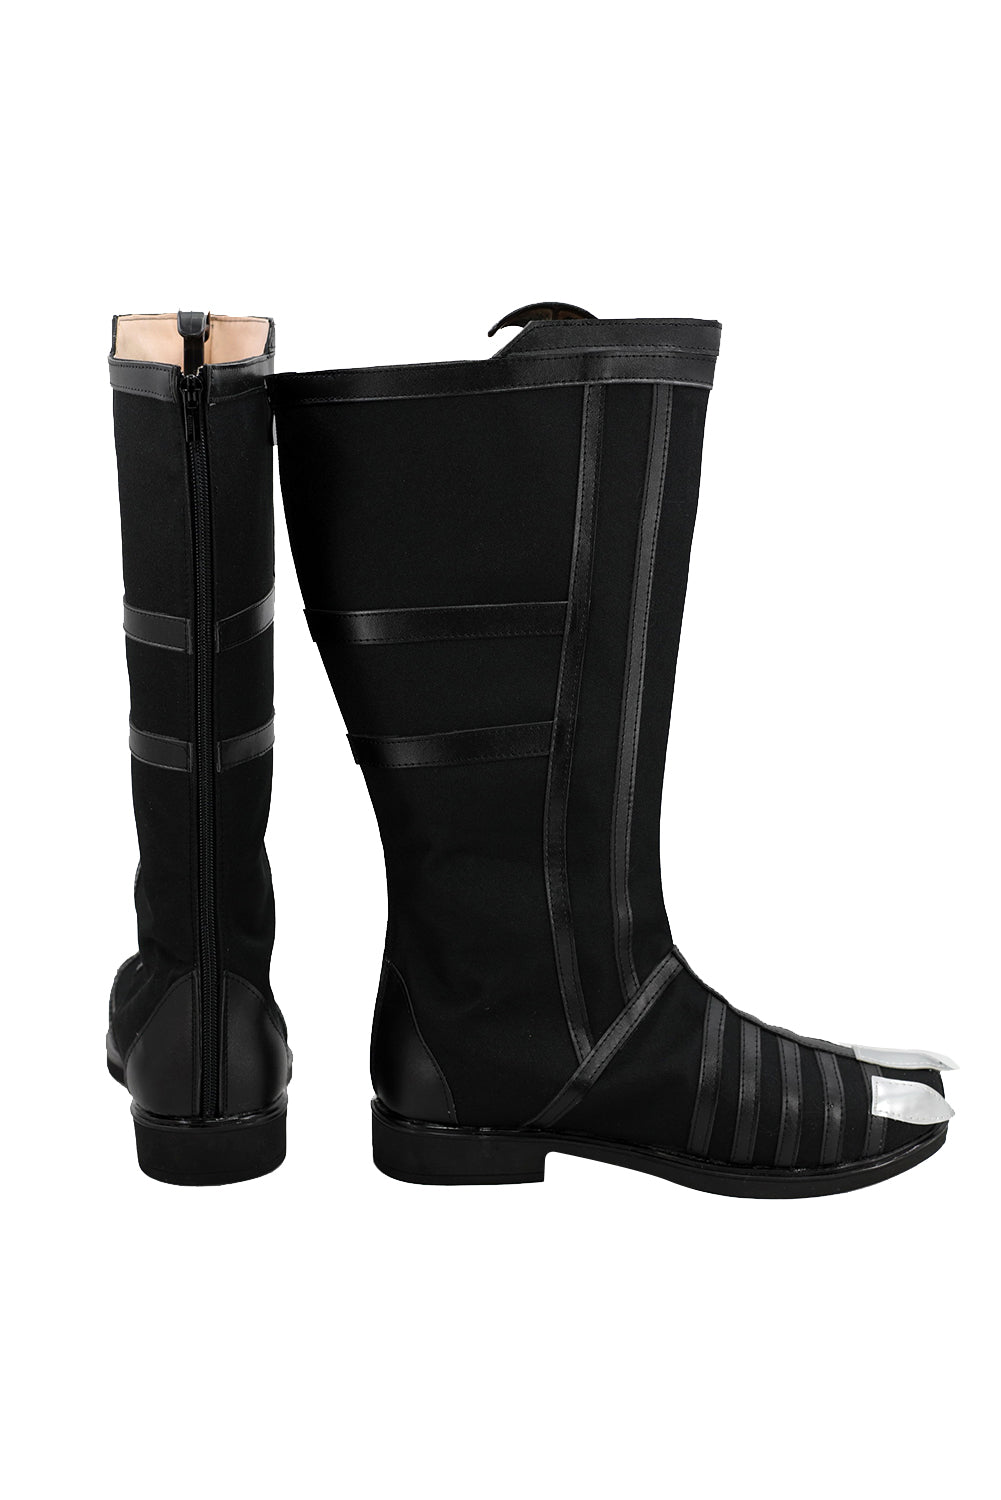 Avengers 3 Black Panther Bottes Cosplay Chaussures